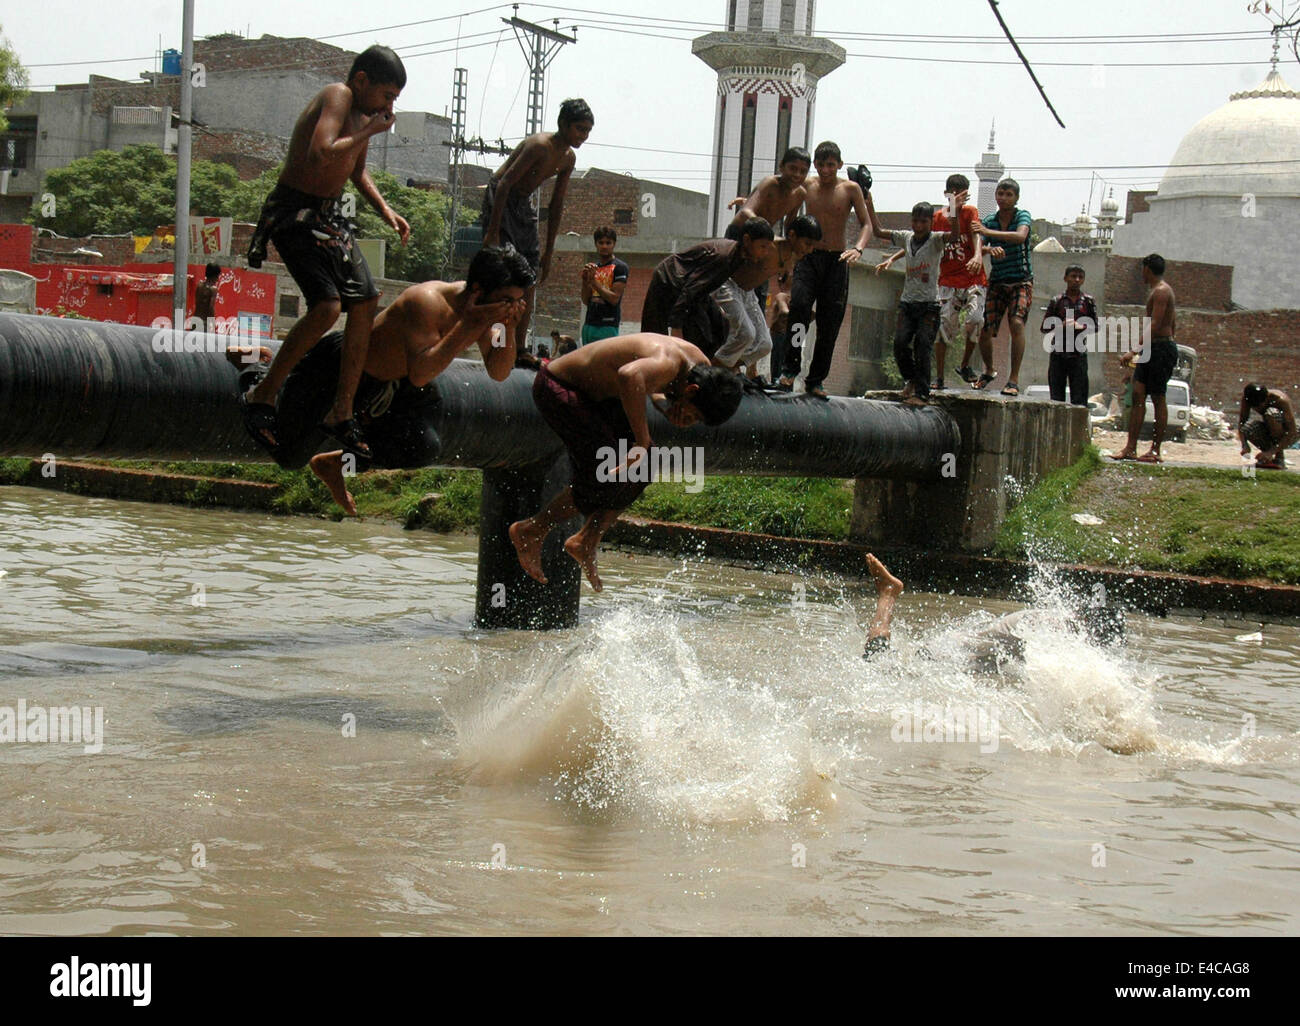 Lahore, Pakistan. 8th July, 2014. Pakistani people take bath in a canal in eastern Pakistan's Lahore on July 8, 2014. The temperature reached over 40 degree centigrade in Lahore on Tuesday. Credit:  Sajjad/Xinhua/Alamy Live News Stock Photo